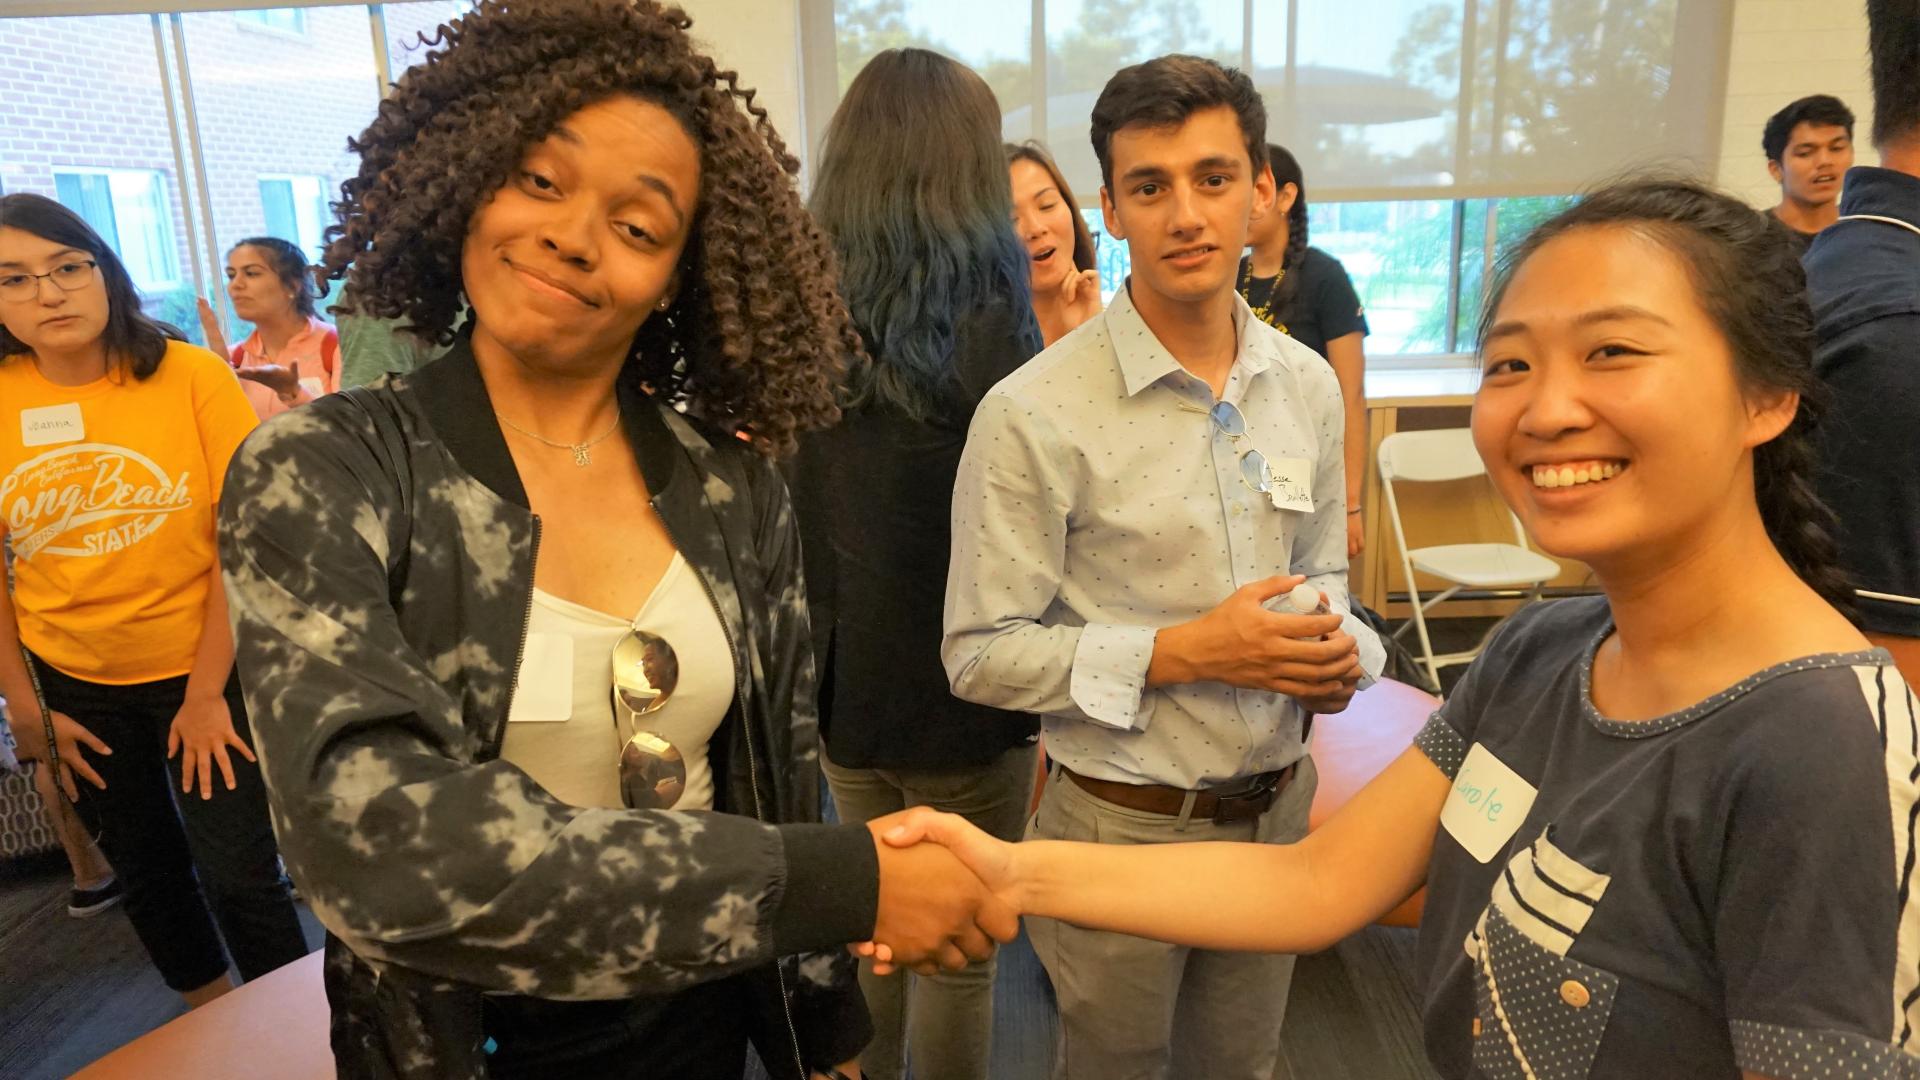 COB Honors Program Meet and Greet 2018 meeting each other shaking hands